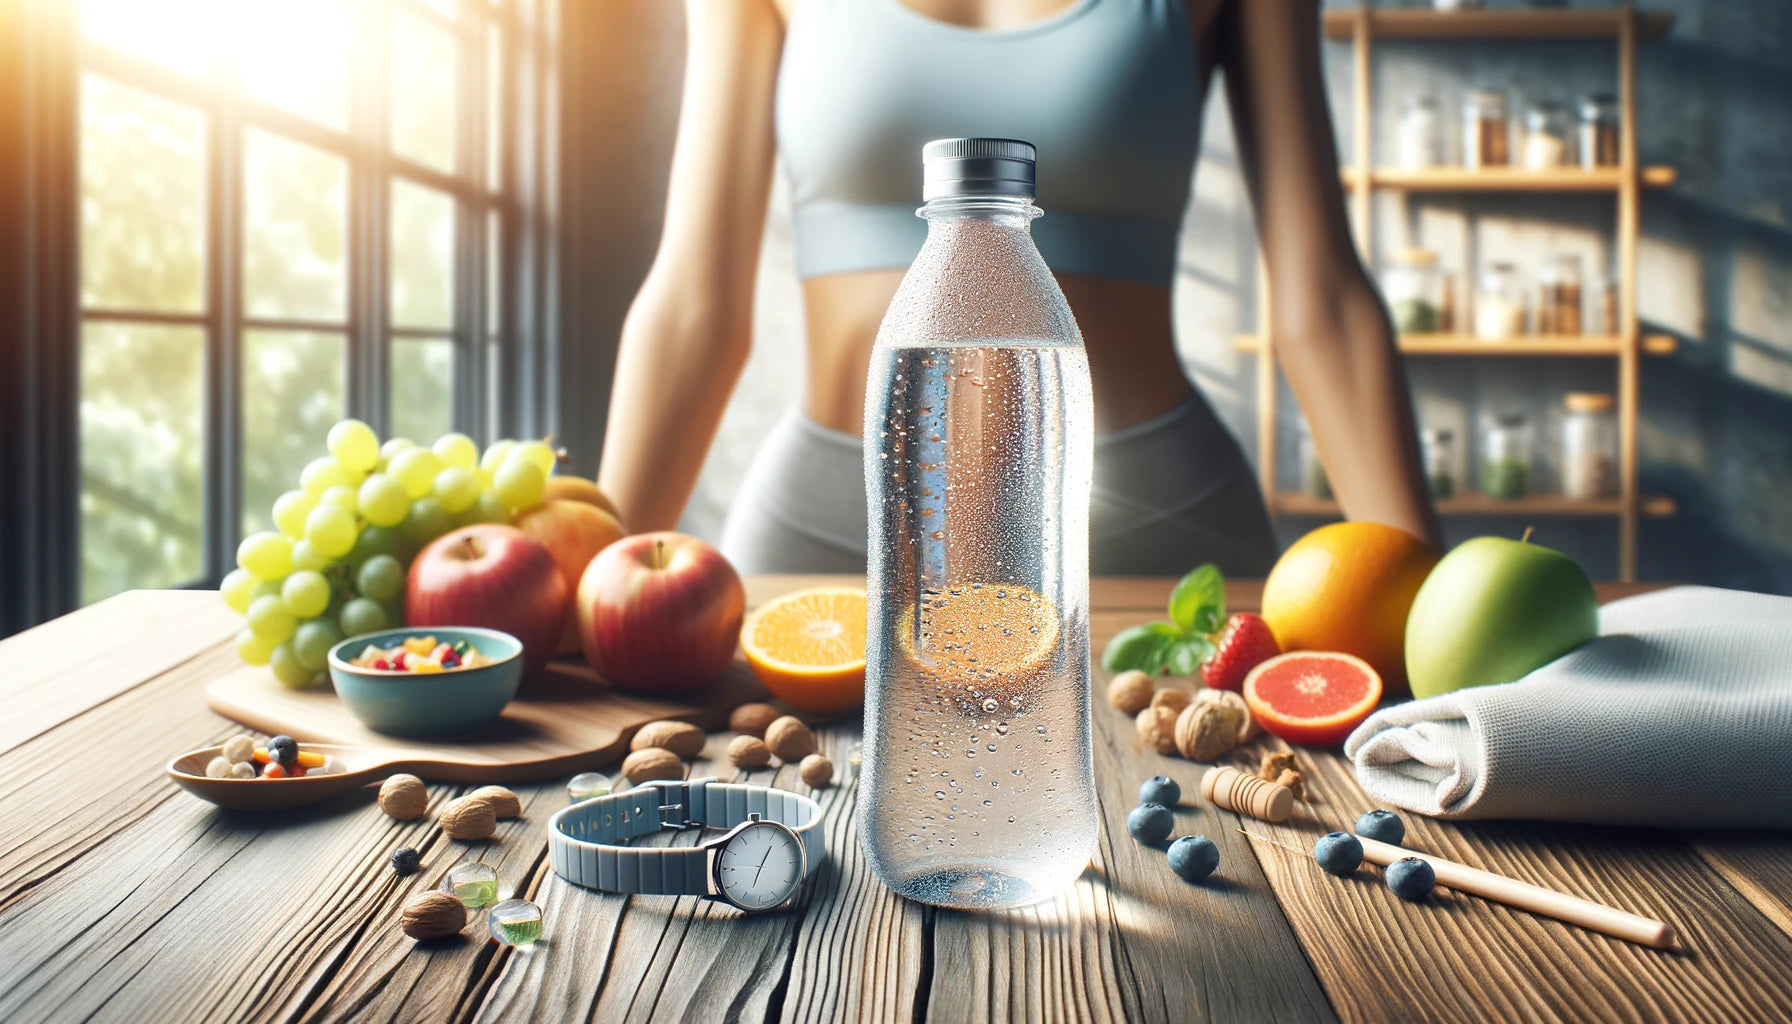 What is the recommended daily water intake?